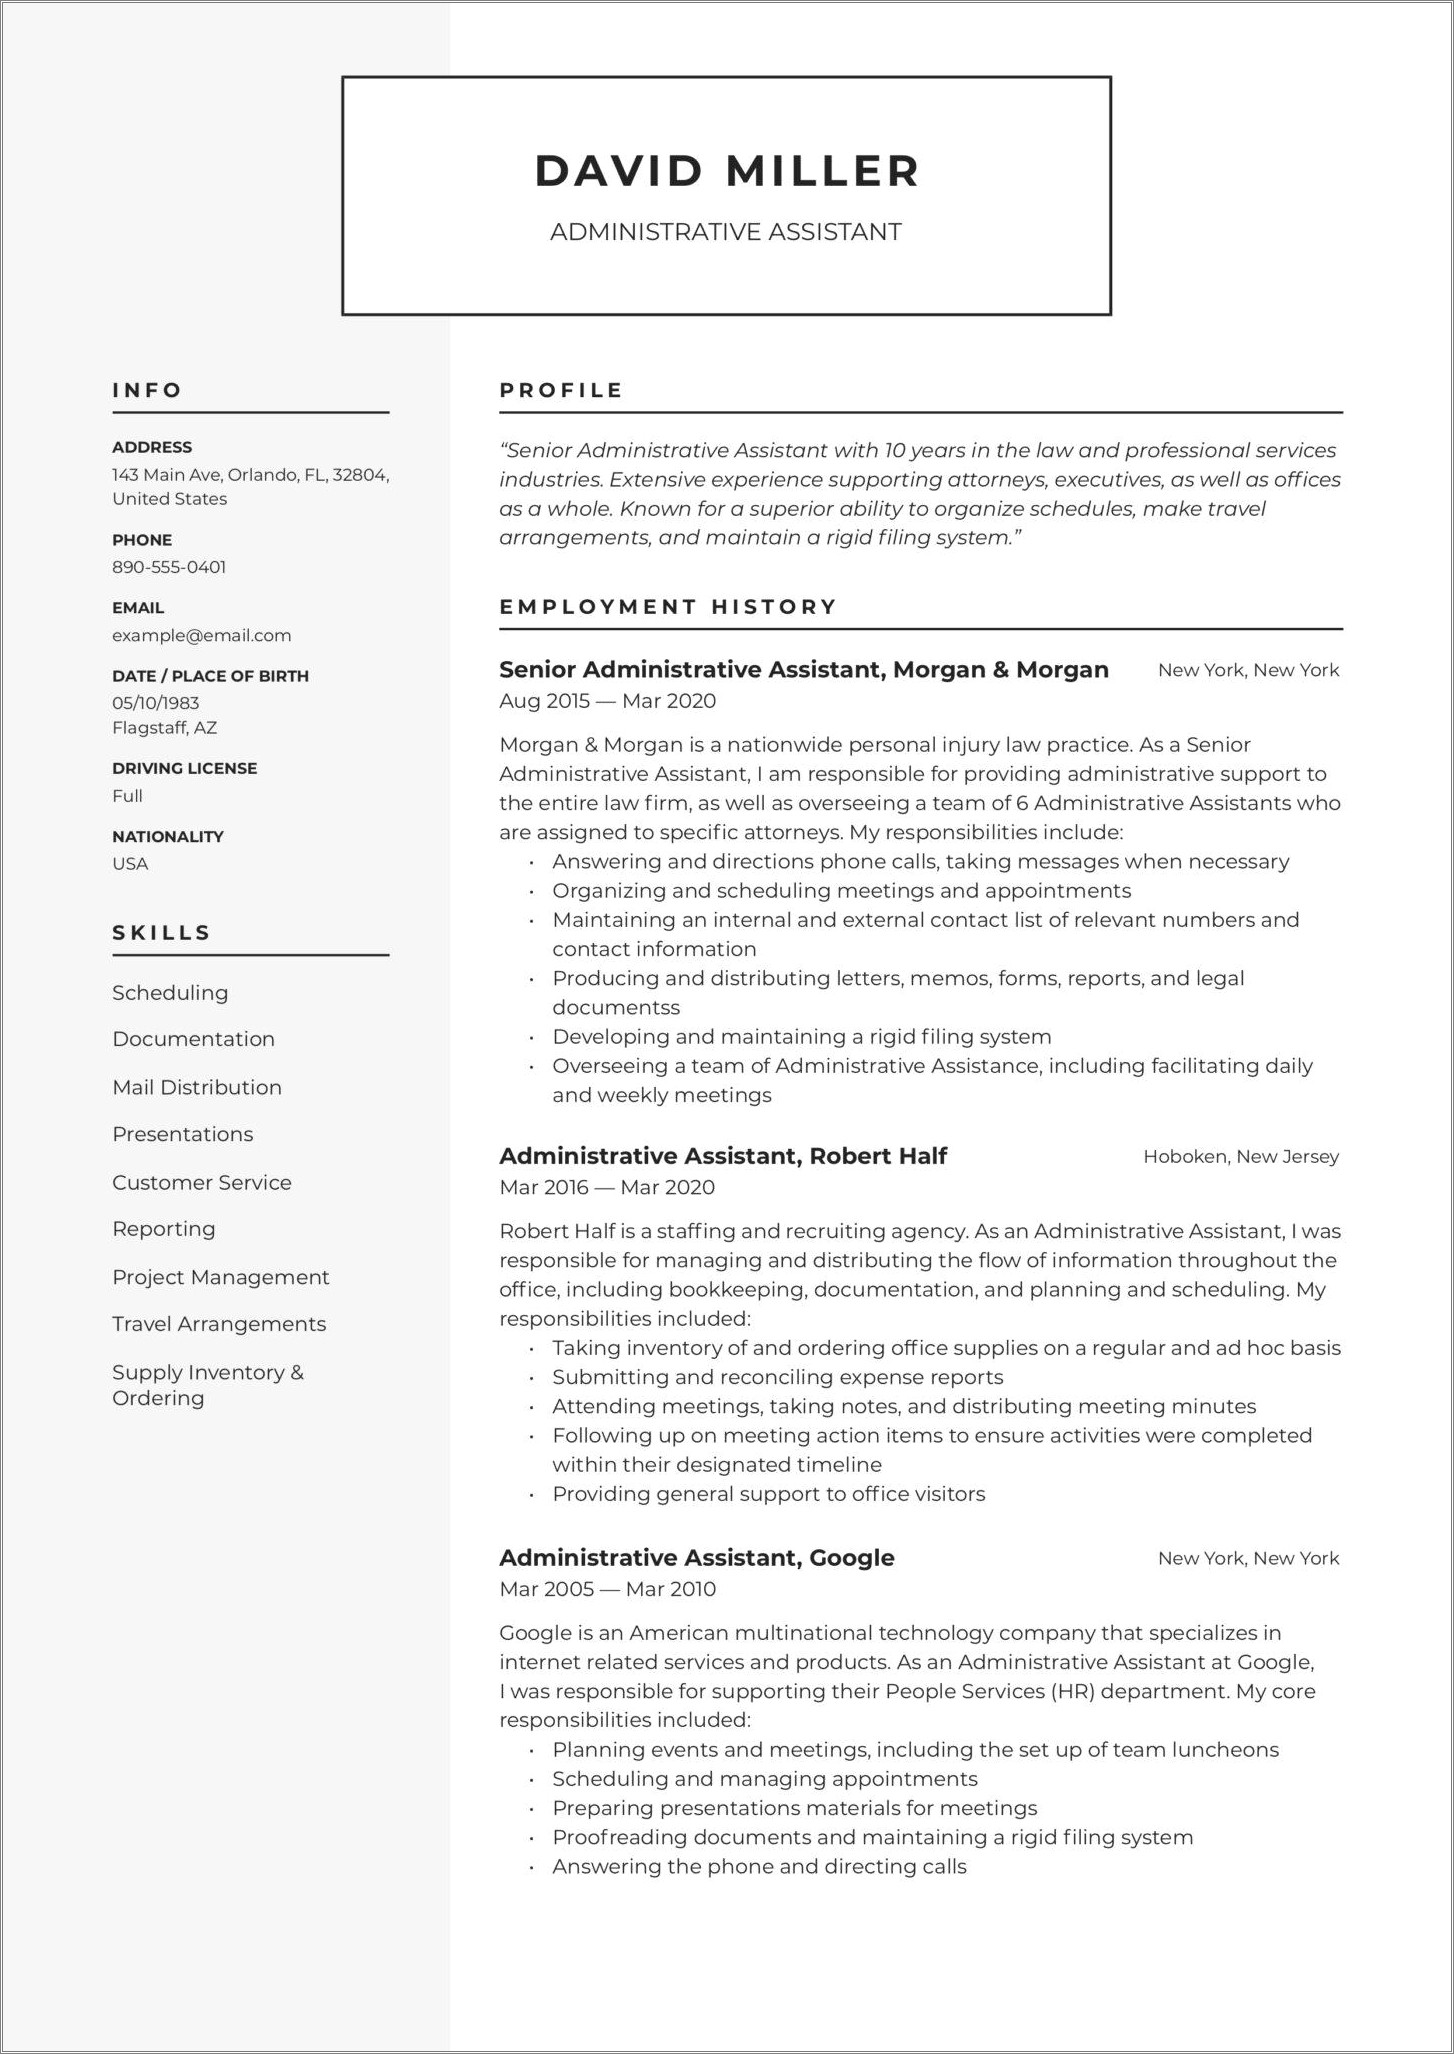 Resume Samples For Administrative Assistant Free